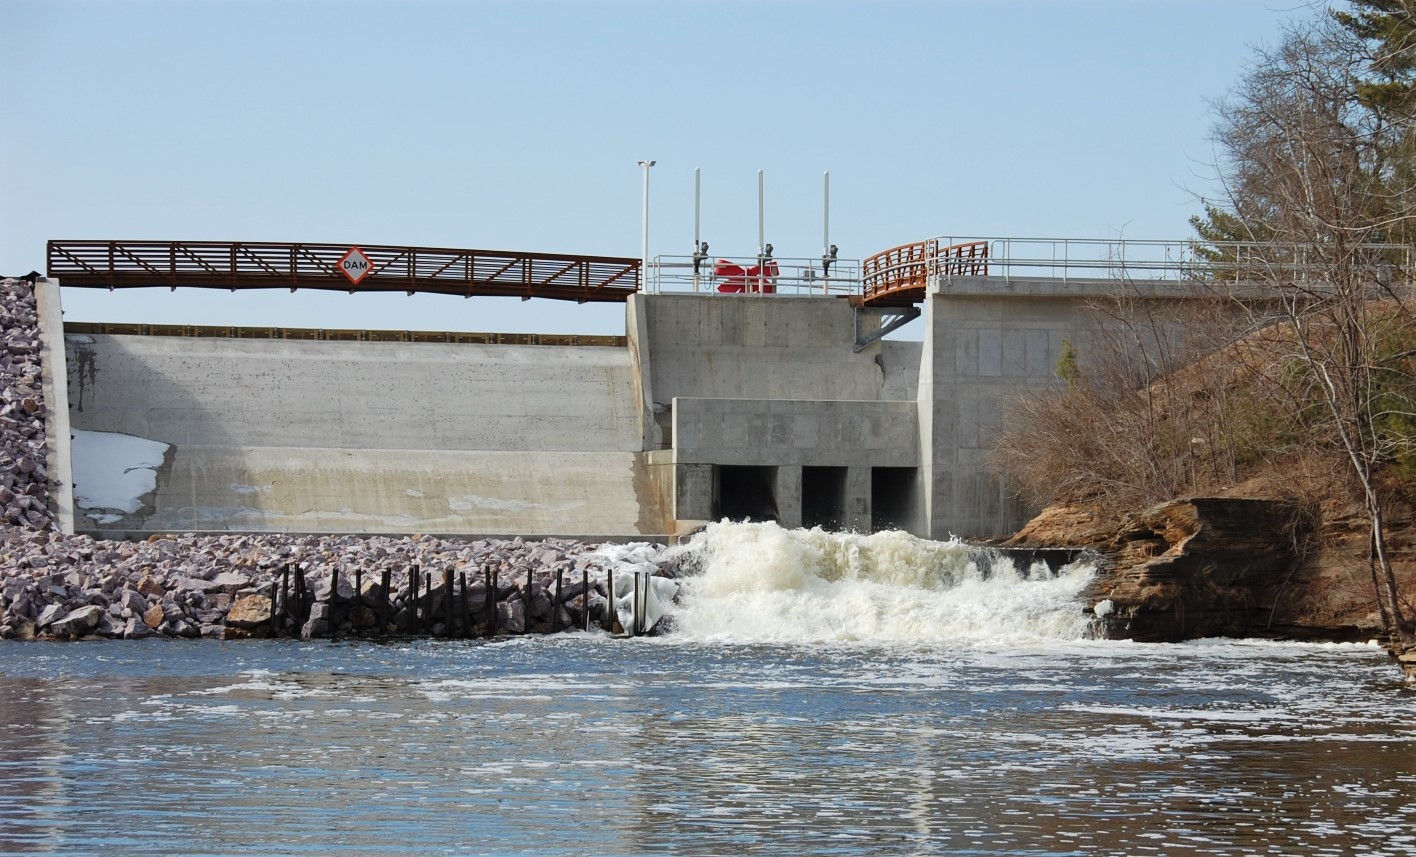 New dam and floodwater mitigation upgrades in the Village of Lake Delton, Wisconsin